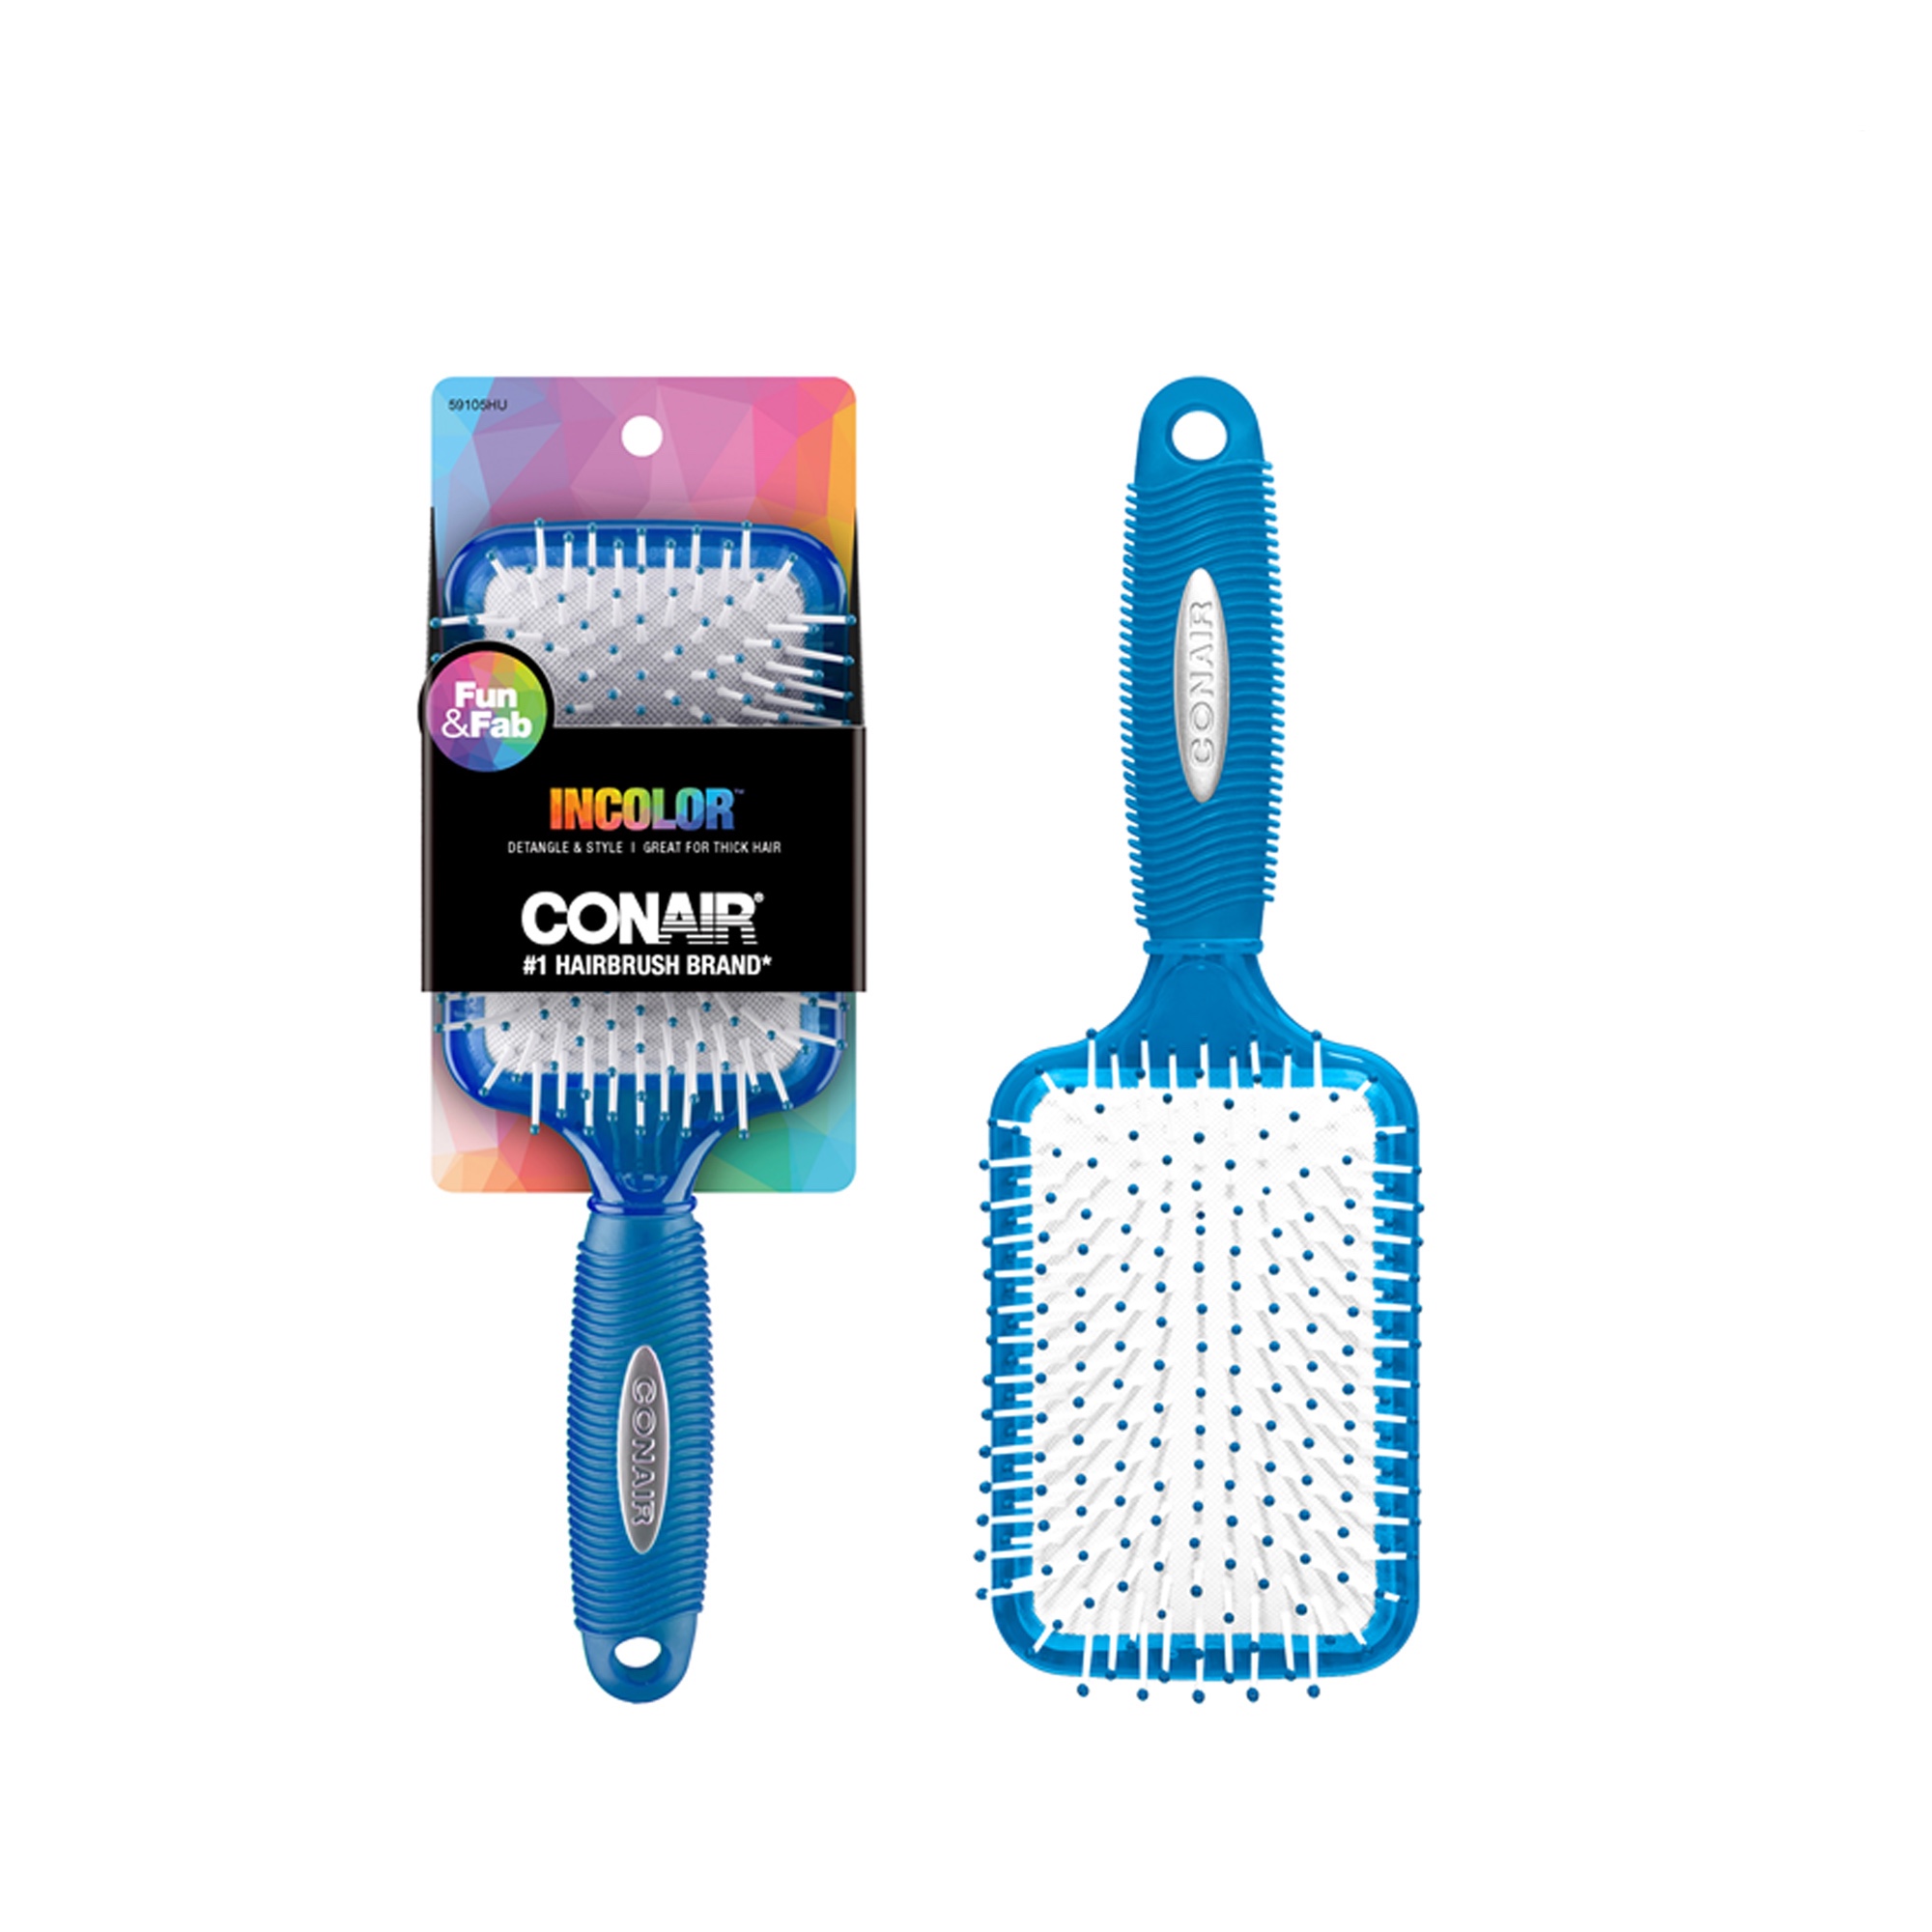 Conair in Color Nylon Bristle Paddle Hairbrush, Colors Vary - image 4 of 9